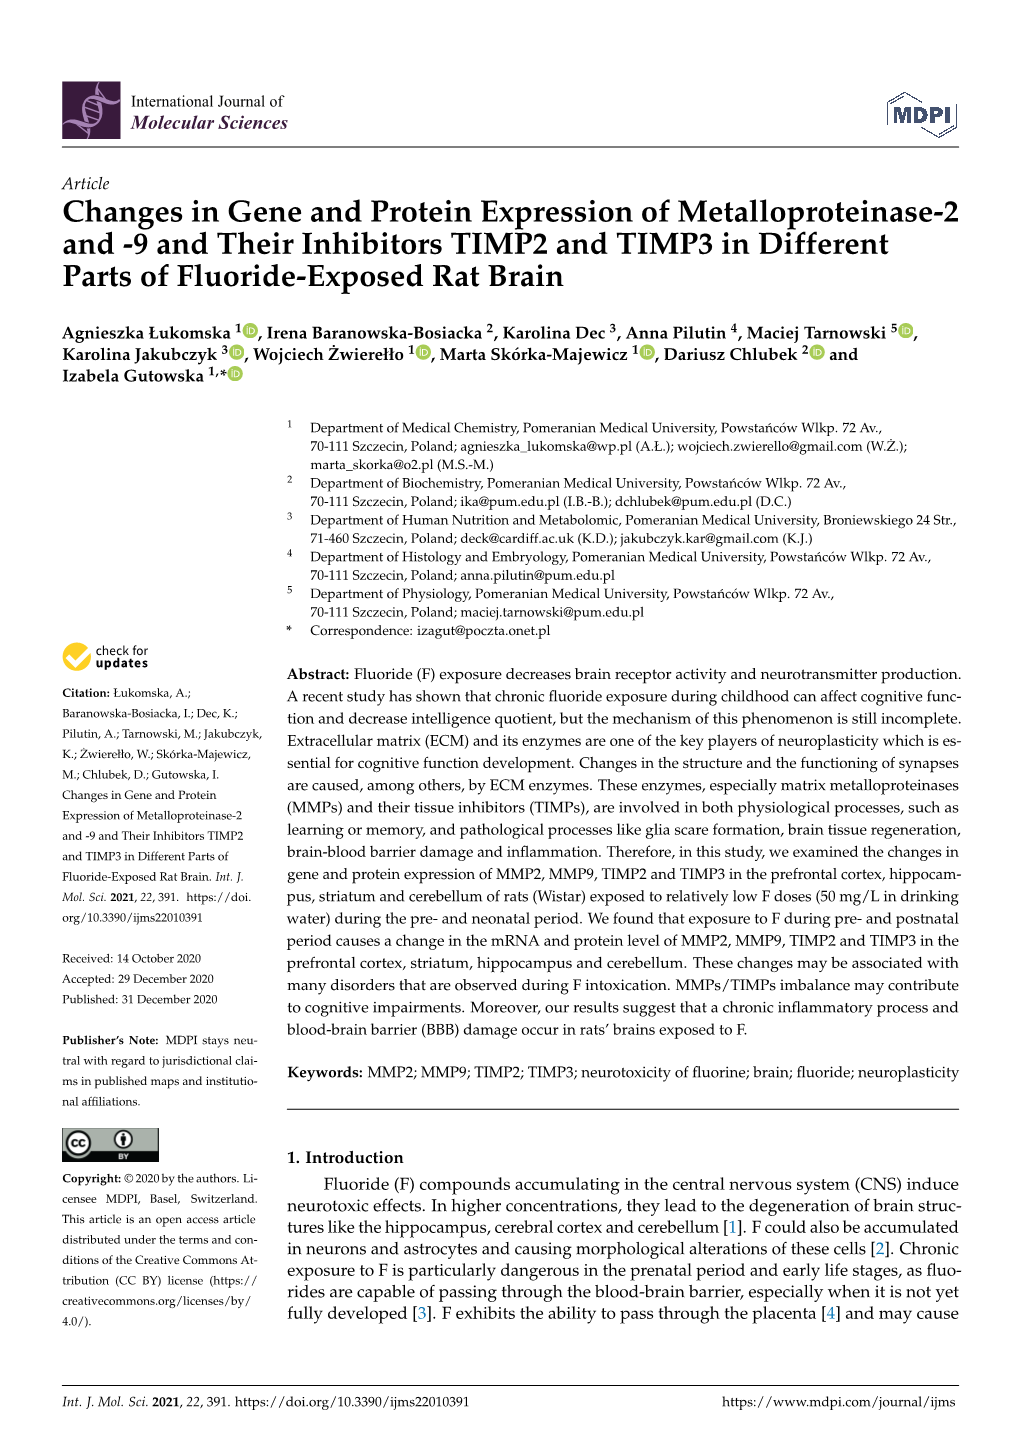 Changes in Gene and Protein Expression of Metalloproteinase-2 and -9 and Their Inhibitors TIMP2 and TIMP3 in Different Parts of Fluoride-Exposed Rat Brain